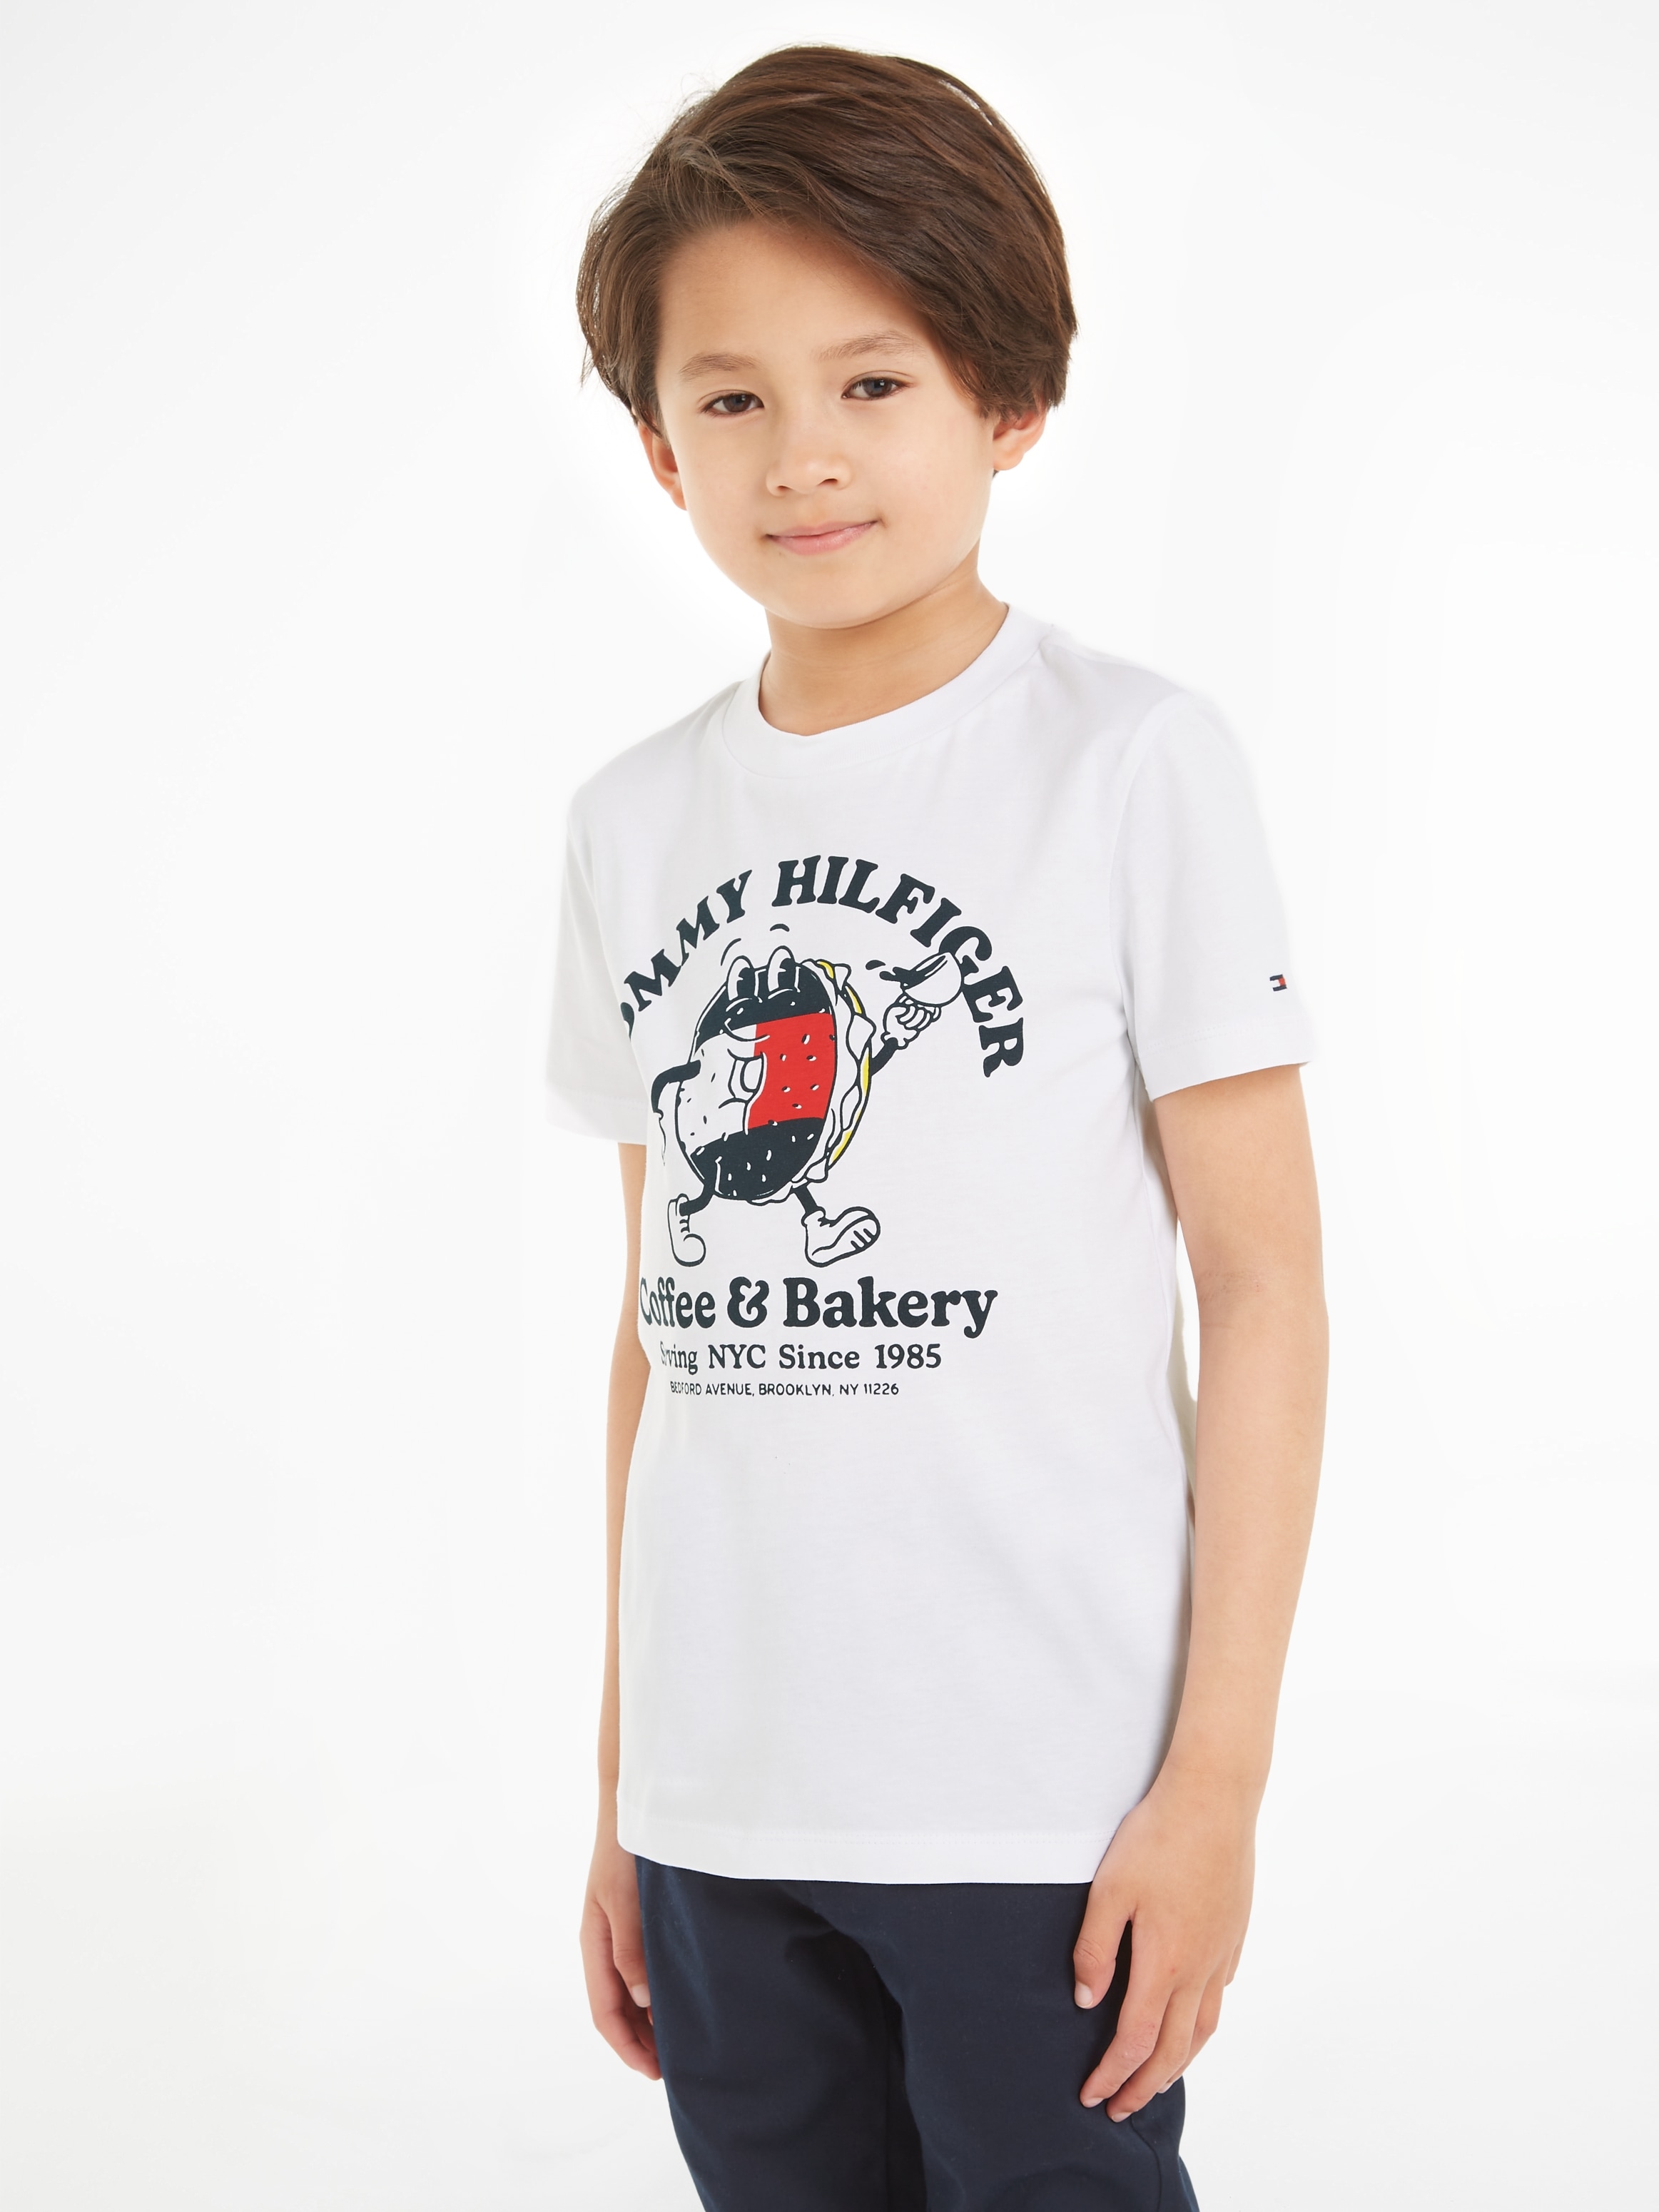 BAGELS »TOMMY Hilfiger OTTO online T-Shirt S/S«, Frontprint TEE Tommy bei mit